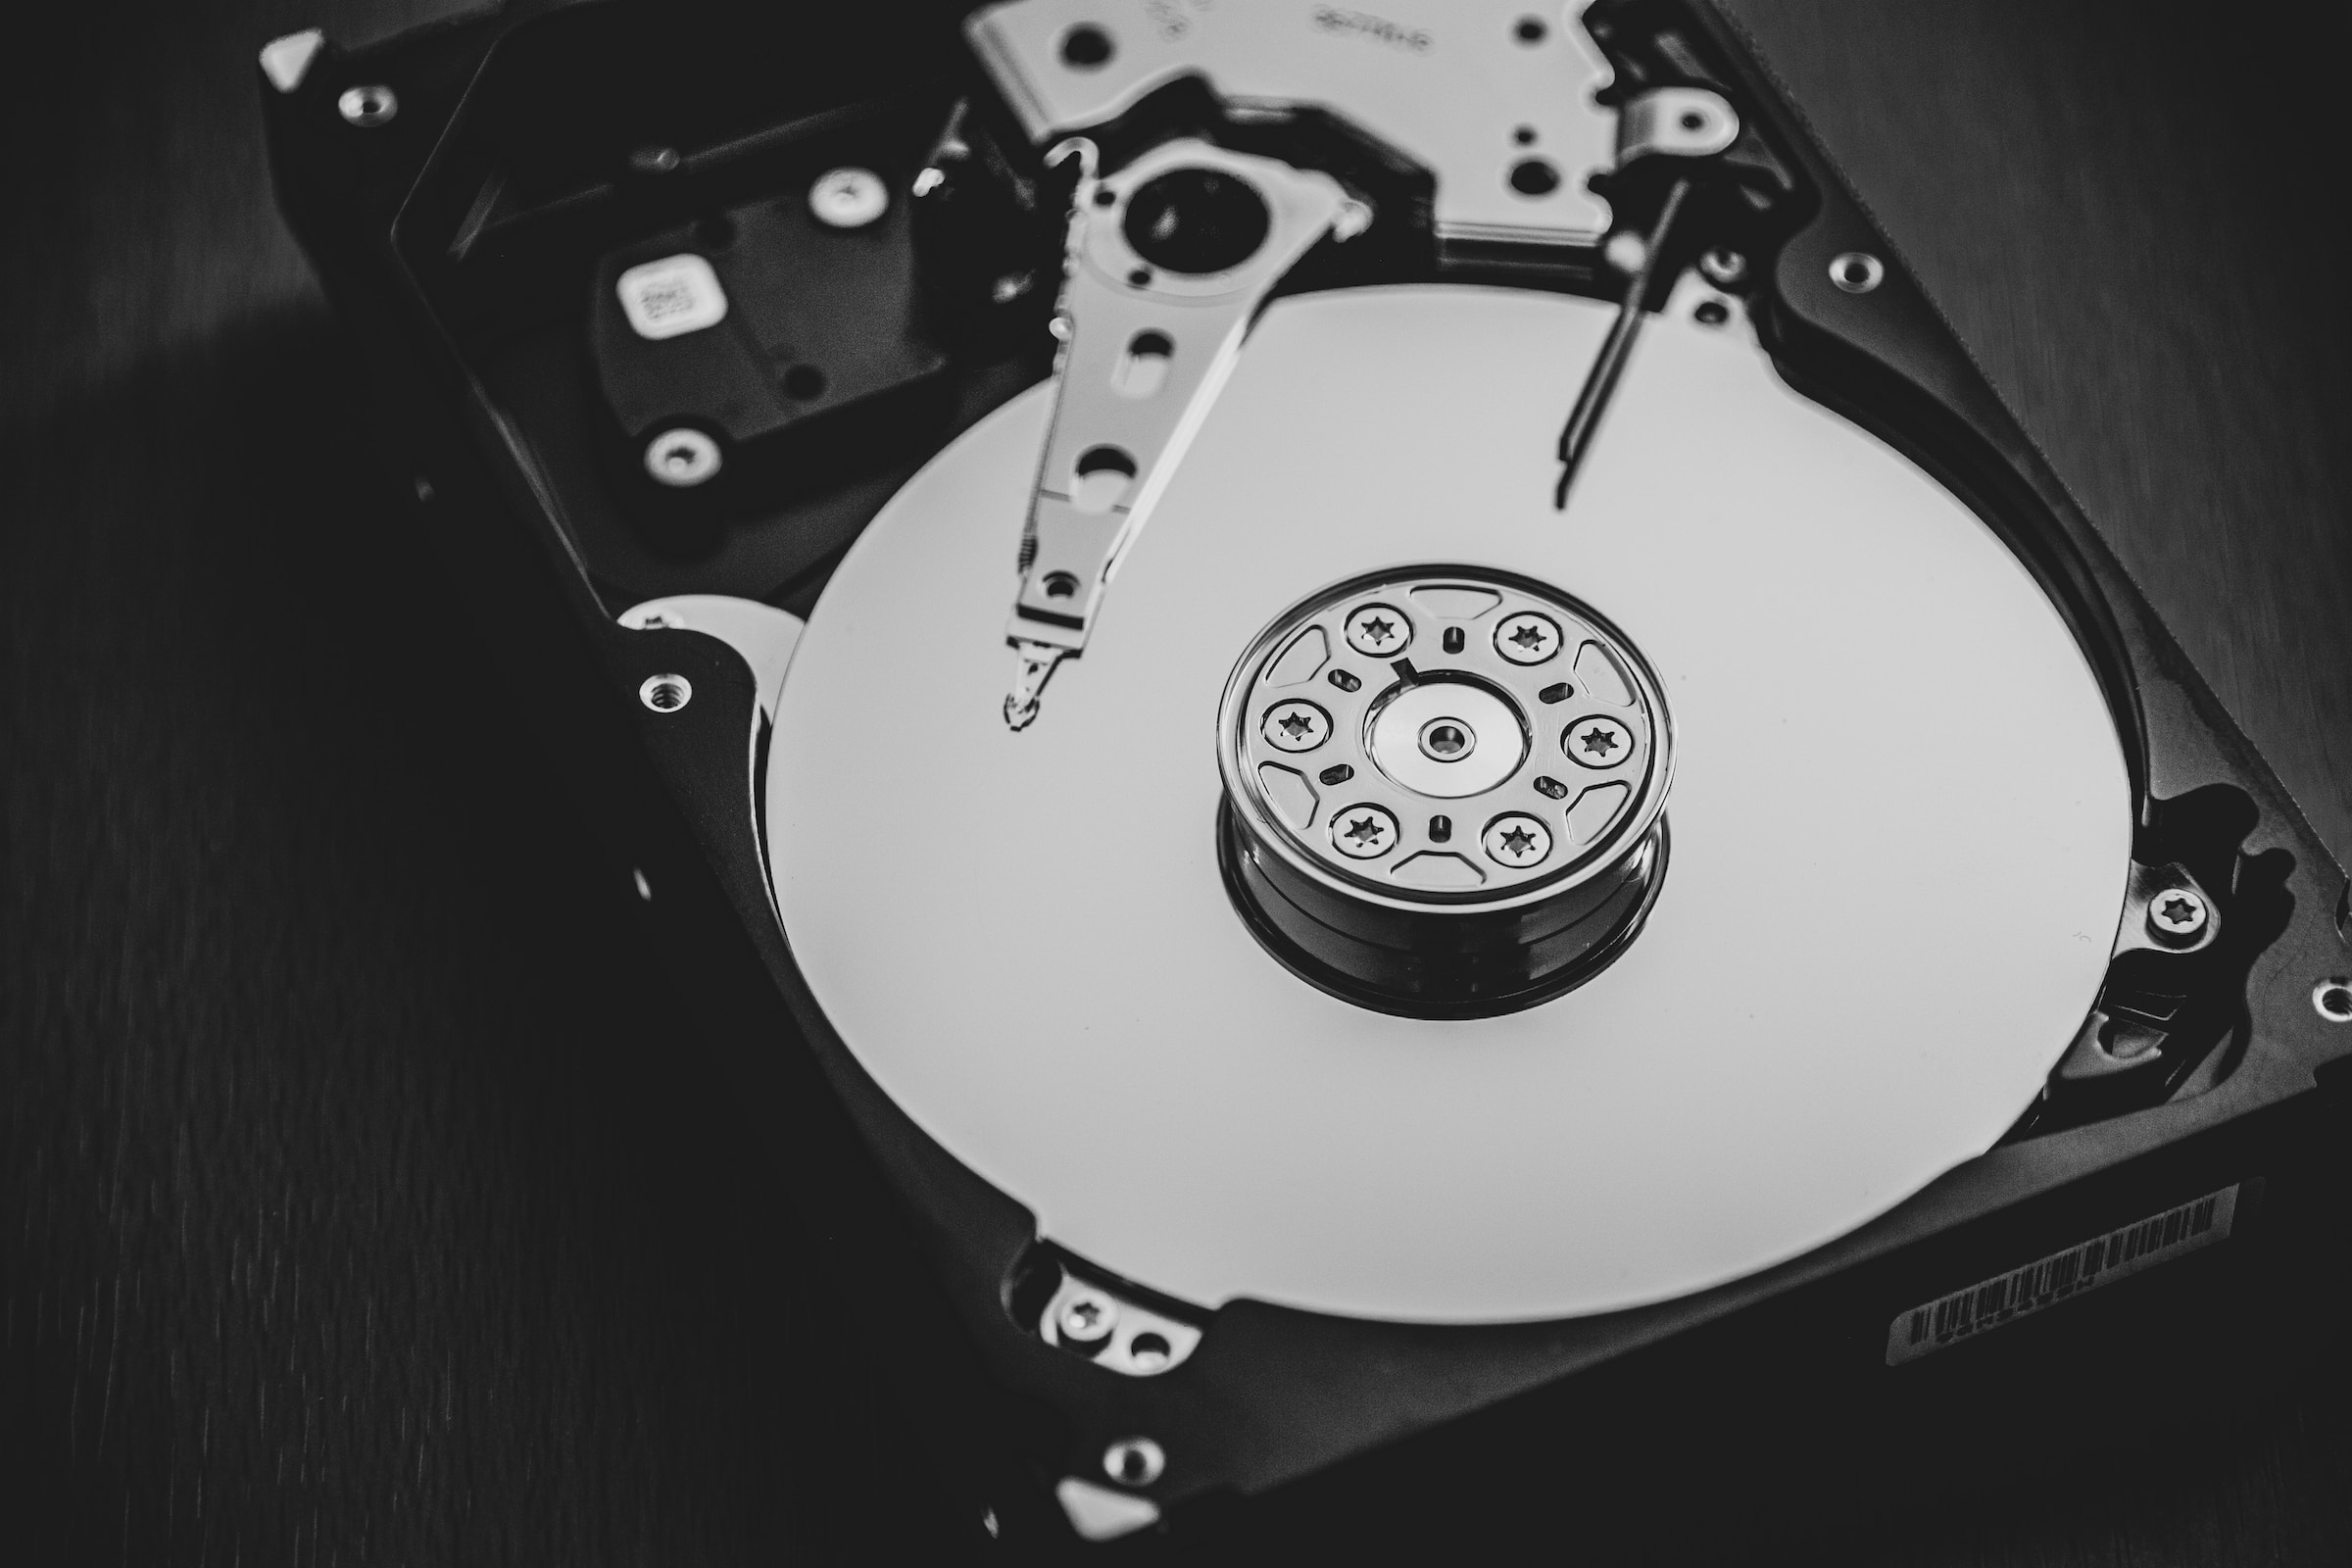 black and white photo of an exposed hard drive